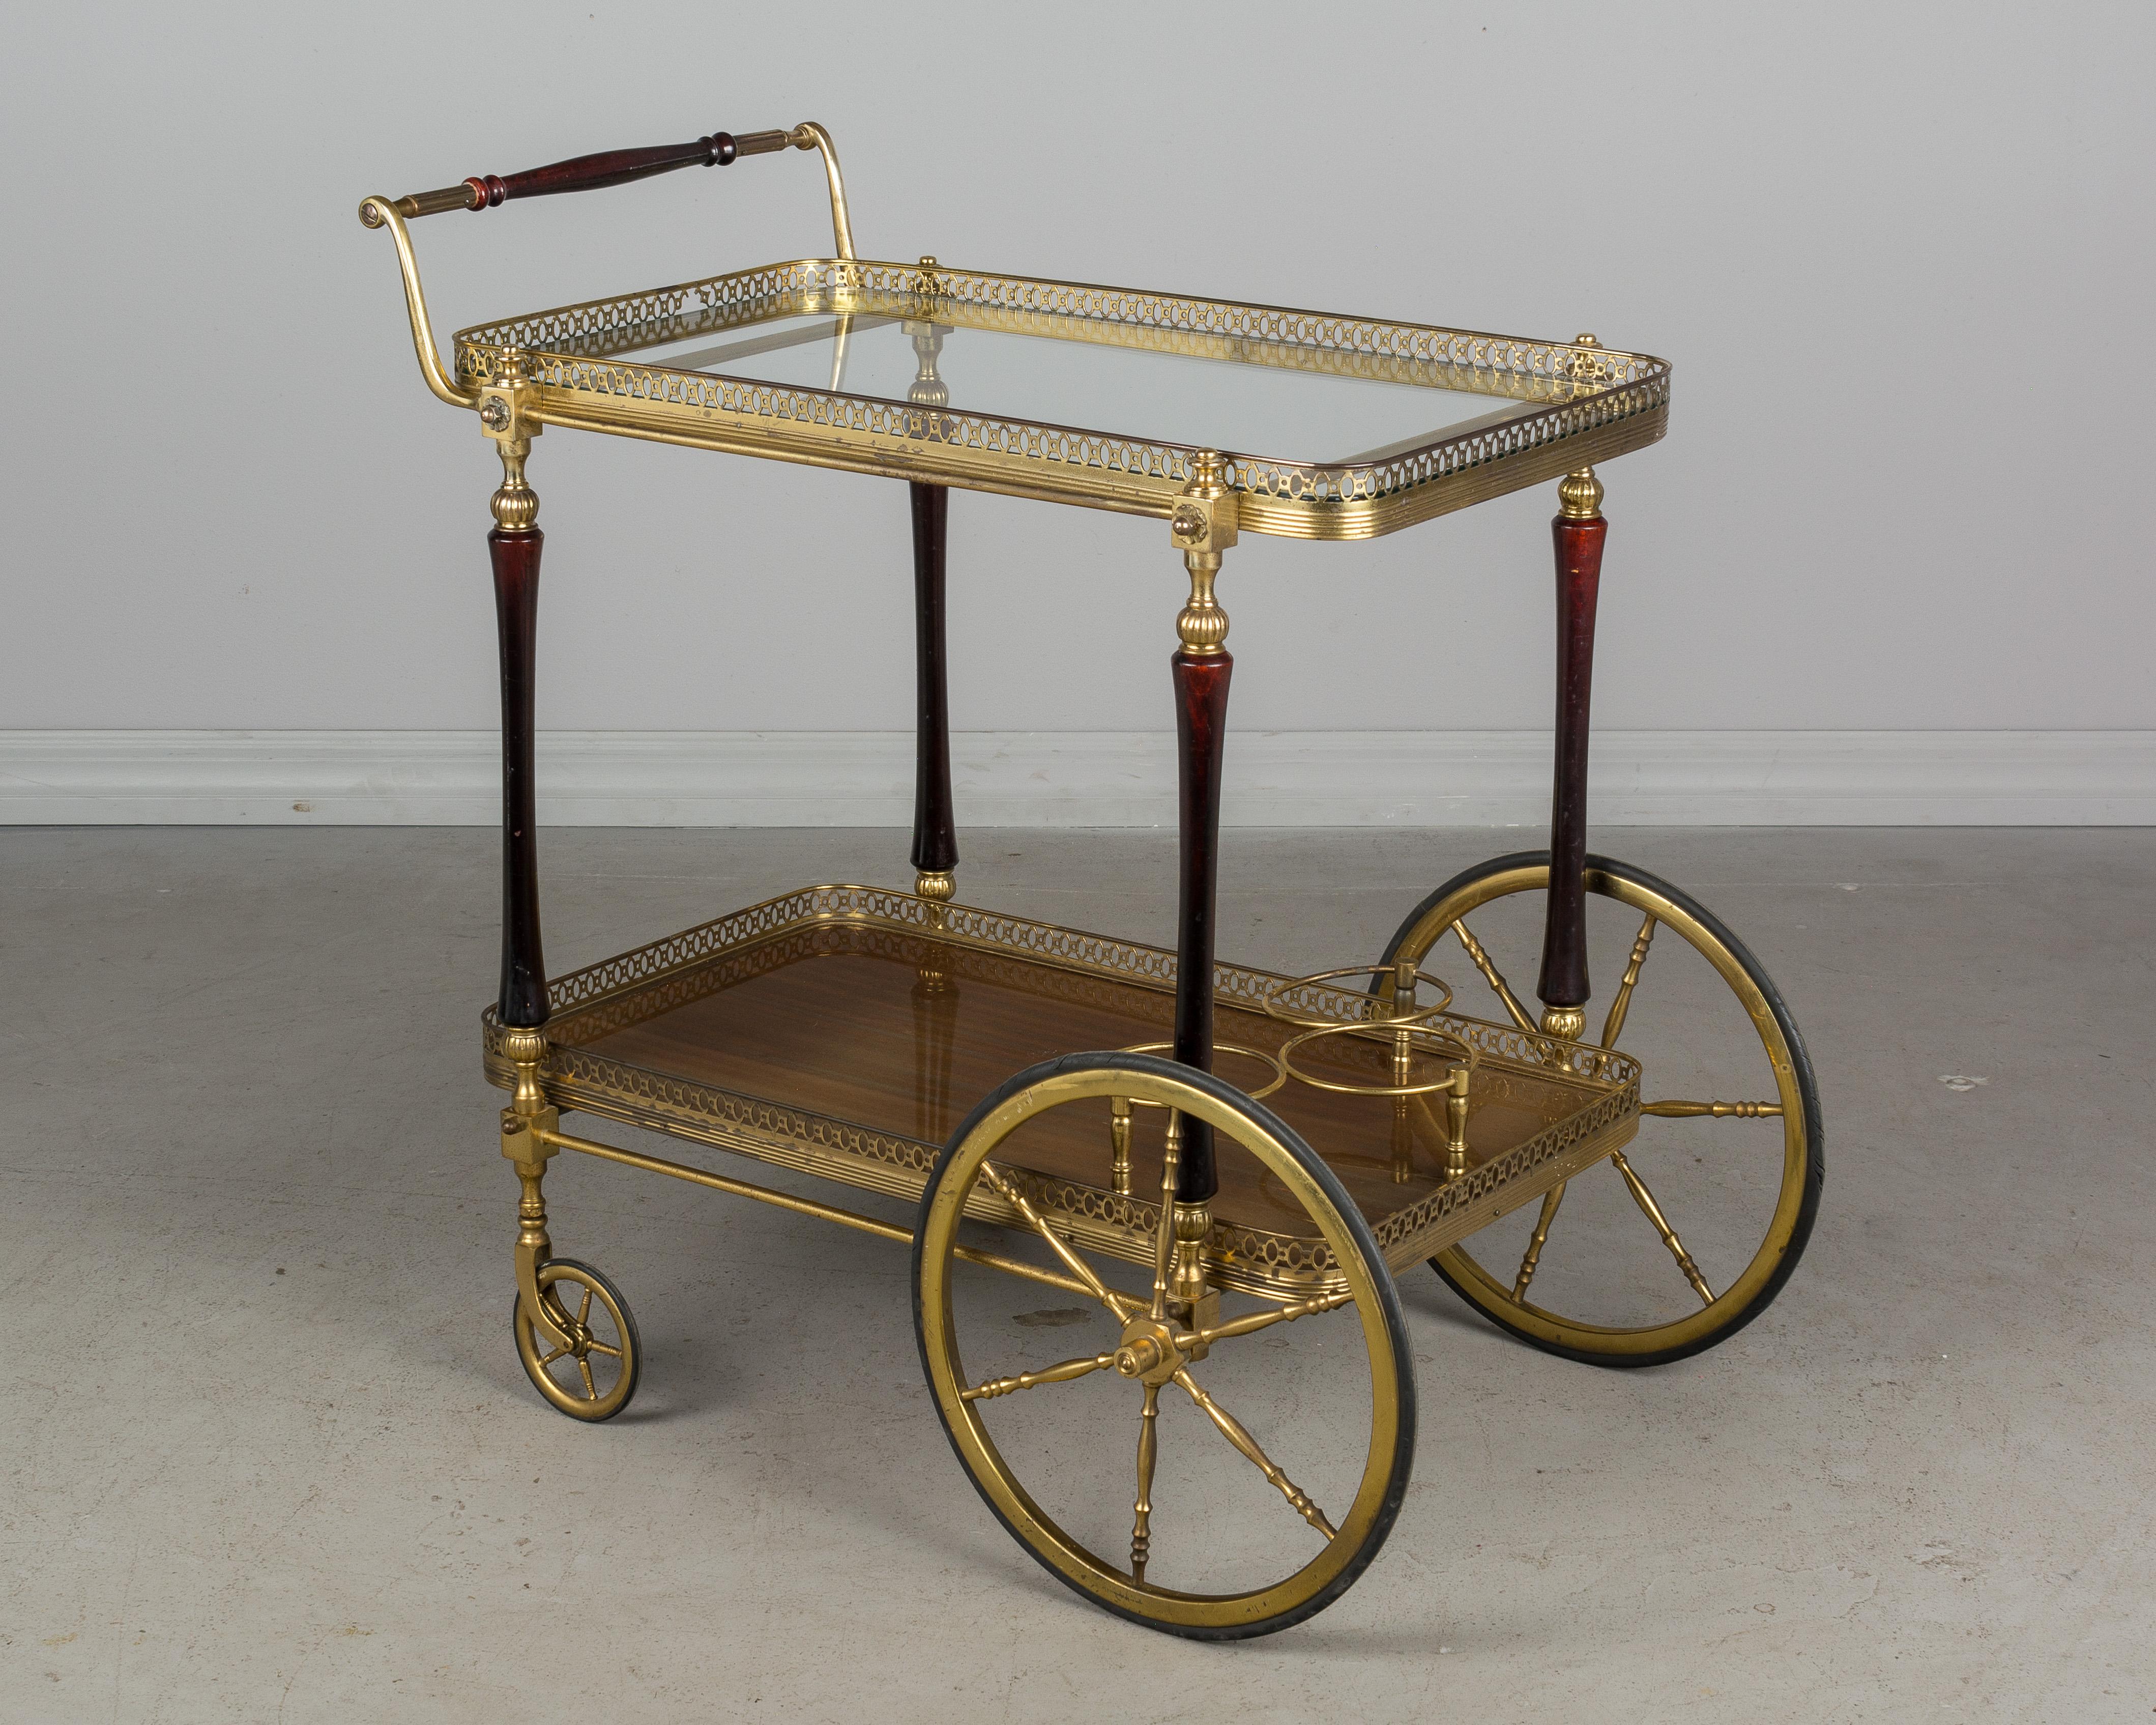 A 1940s French solid brass and mahogany bar cart with glass shelves surrounded by a decorative brass gallery. The brass has not been polished and retains and old warm patina with pitting in places. The glass of the upper shelf is removable and has a